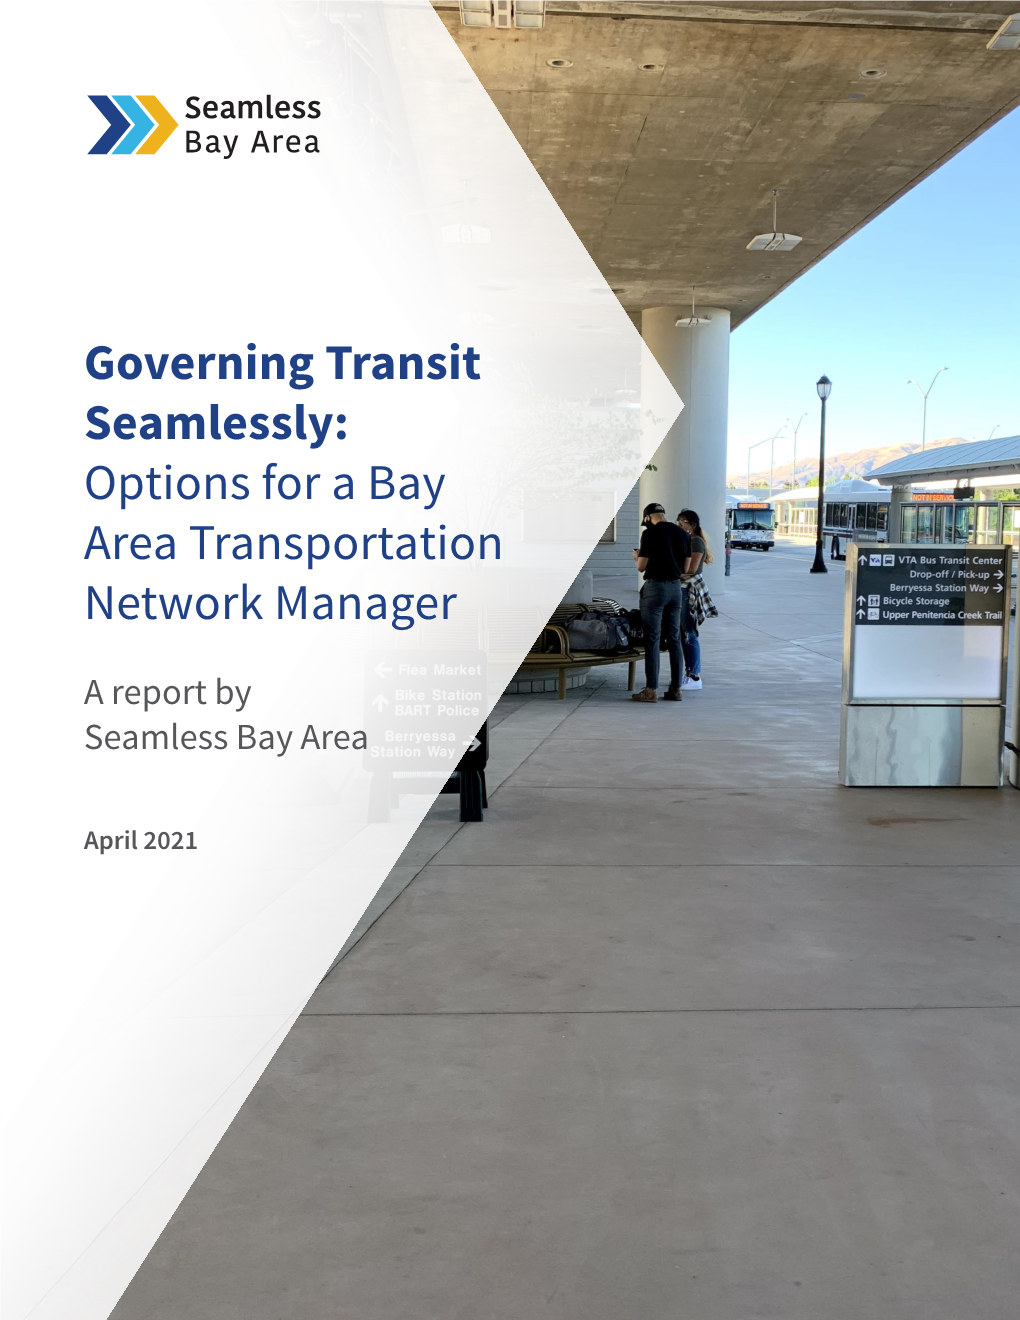 Options for a Bay Area Transportation Network Manager